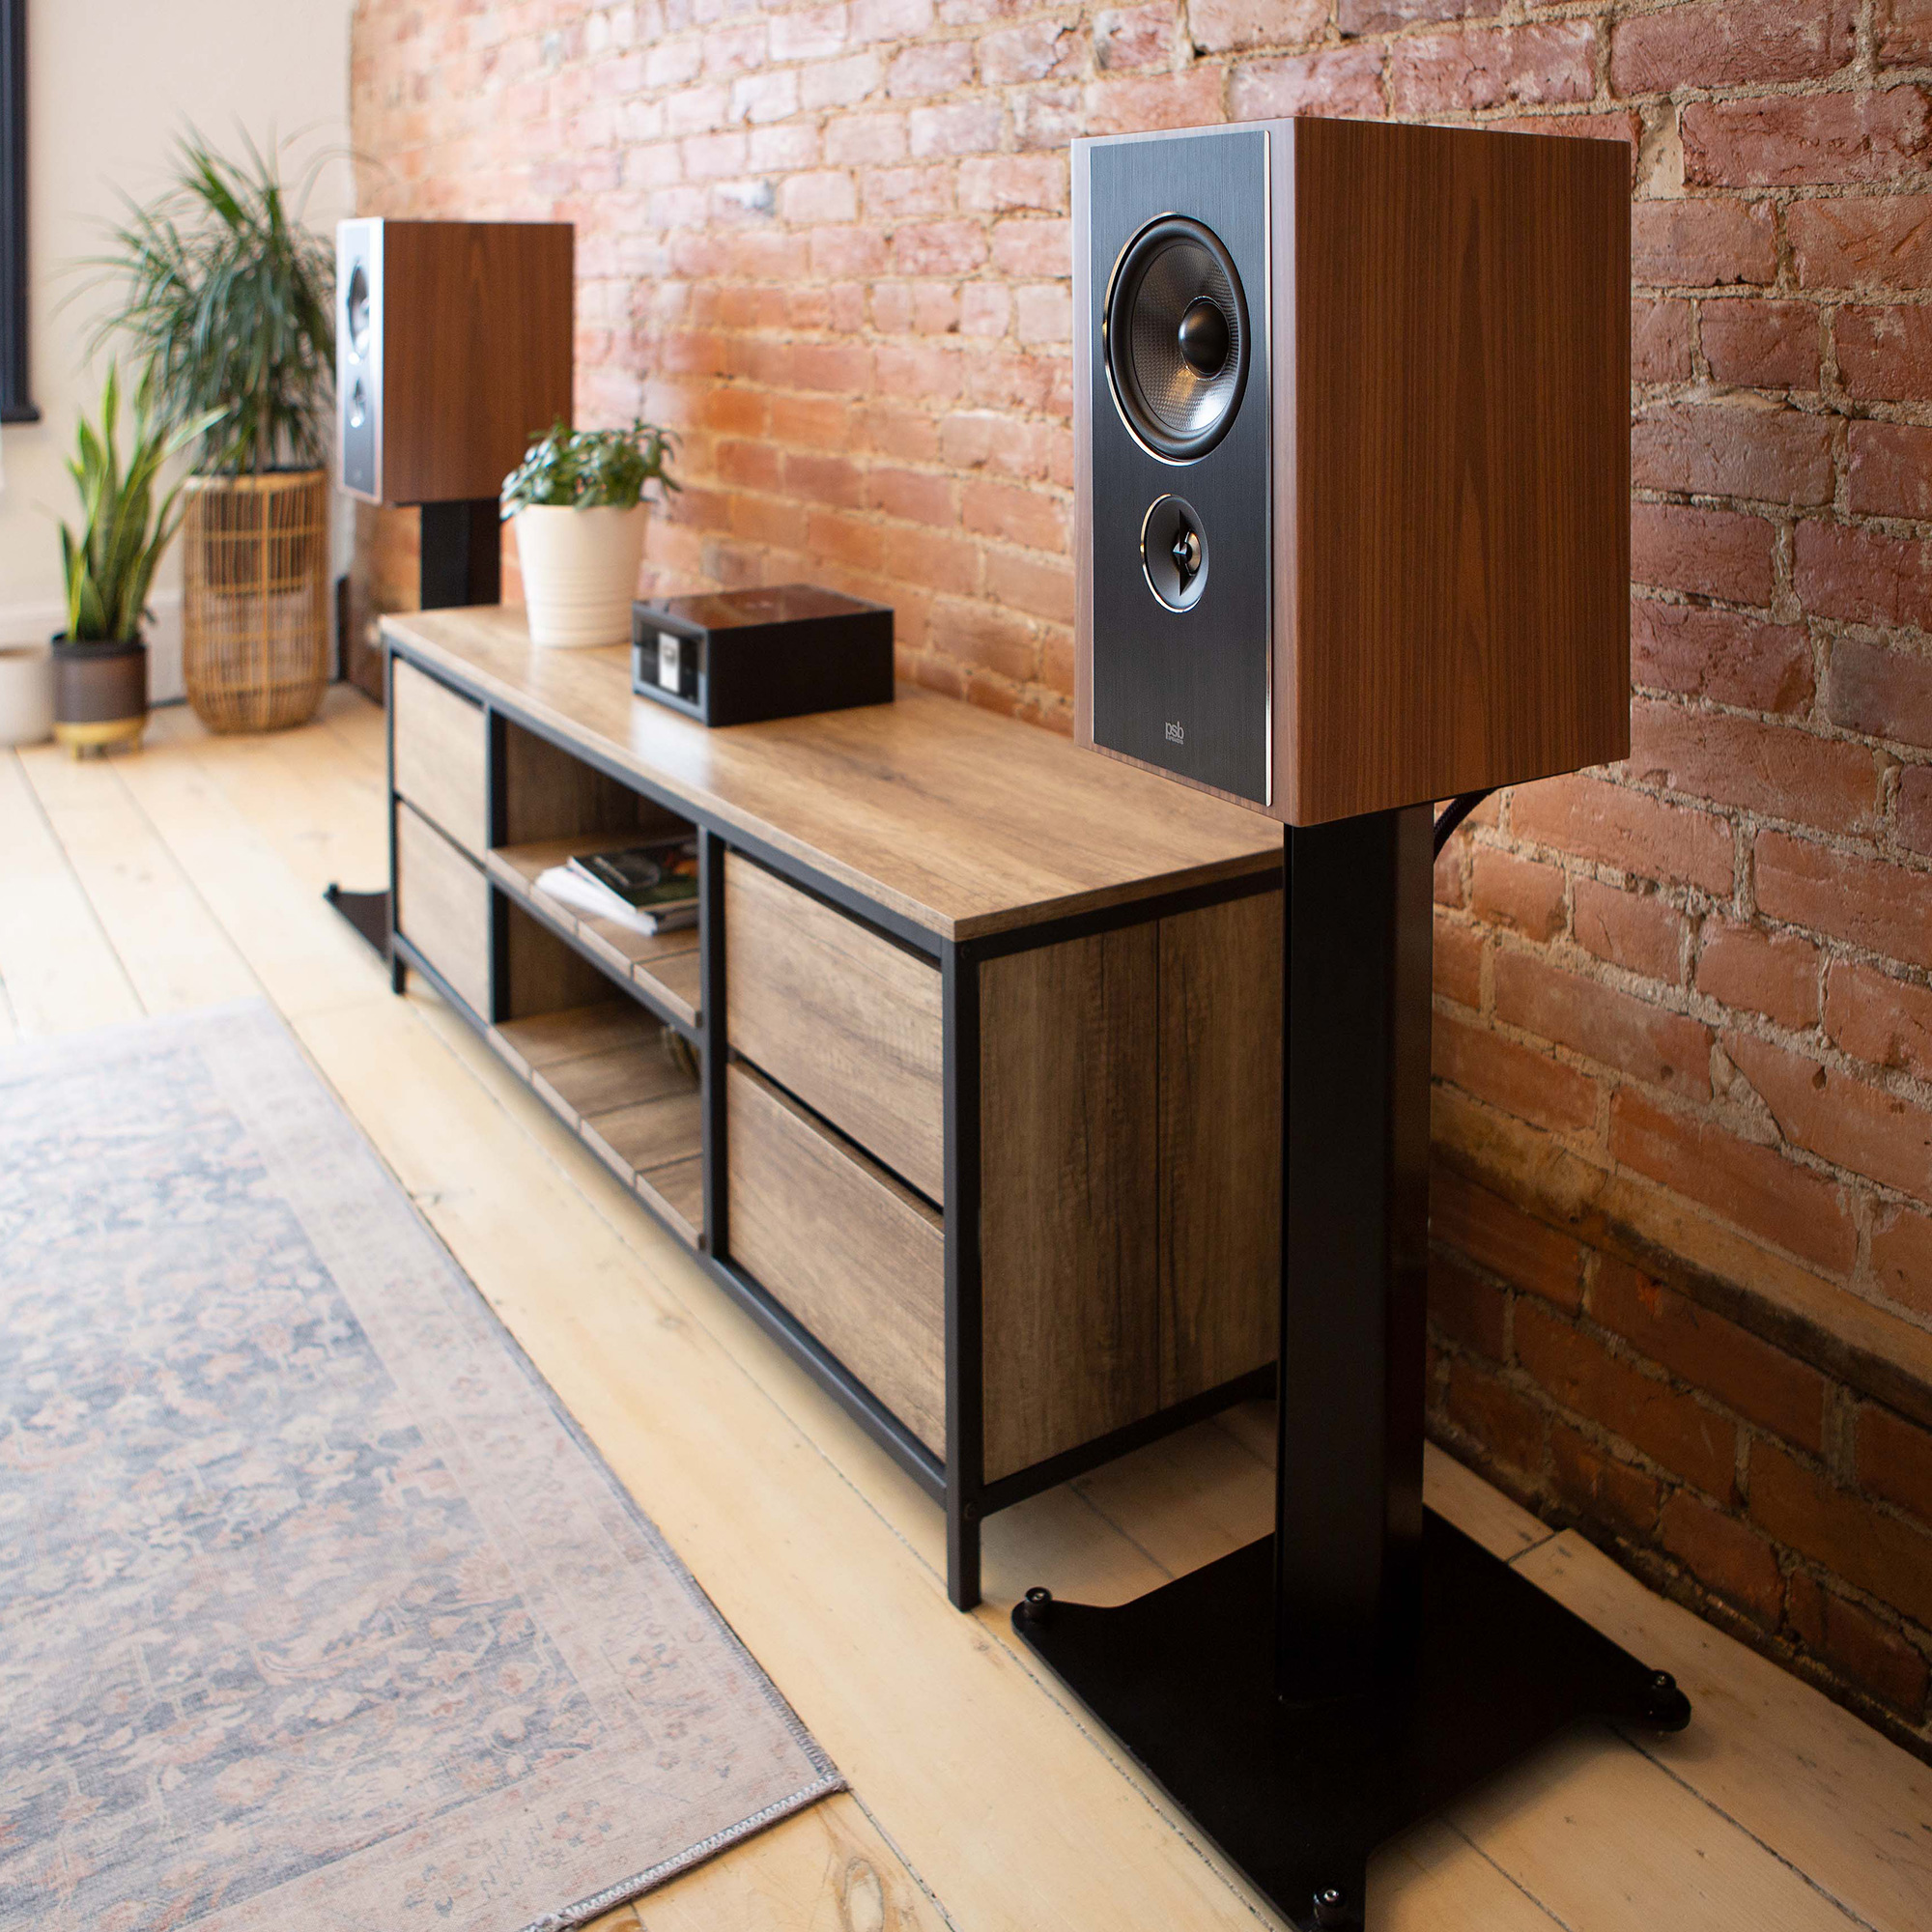 Two Synchrony B600 Bookshelf speakers on stands in a room